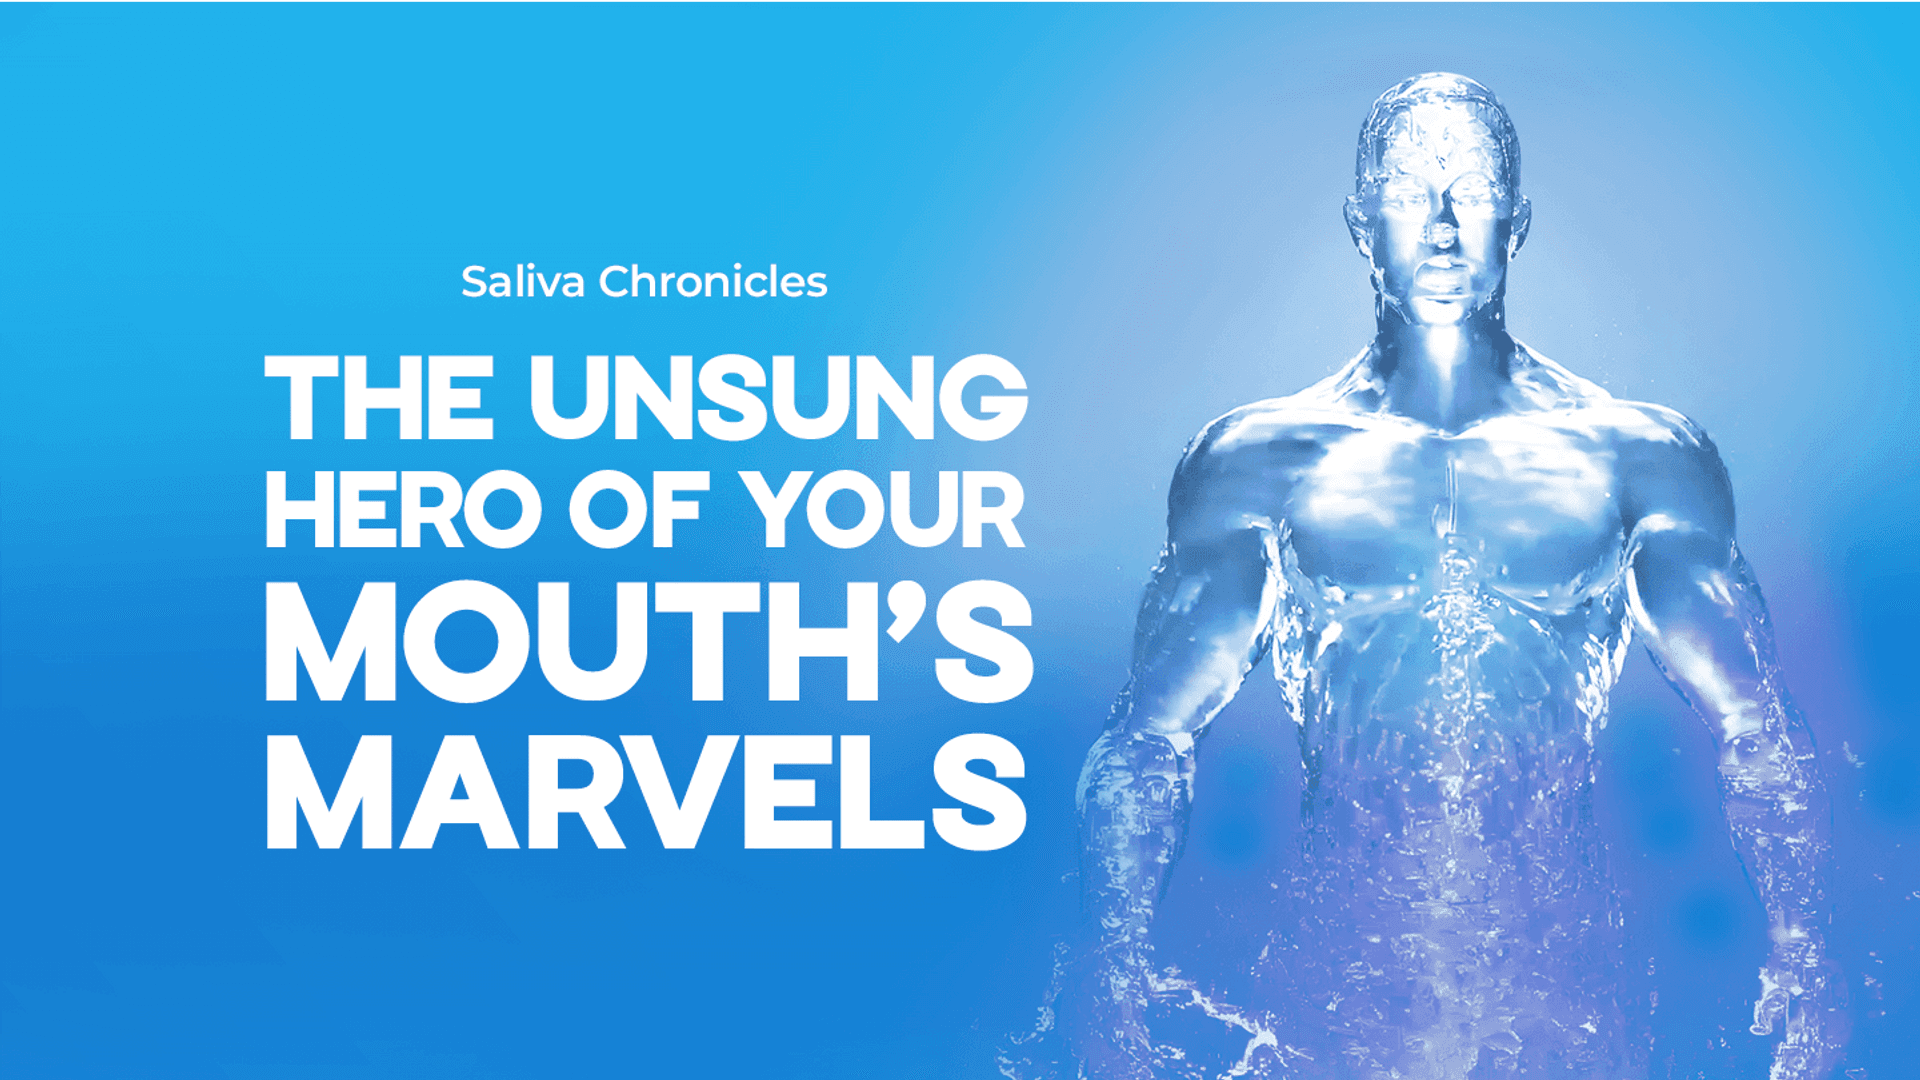 Saliva Chronicles: The Unsung Hero of Your Mouth's Marvels